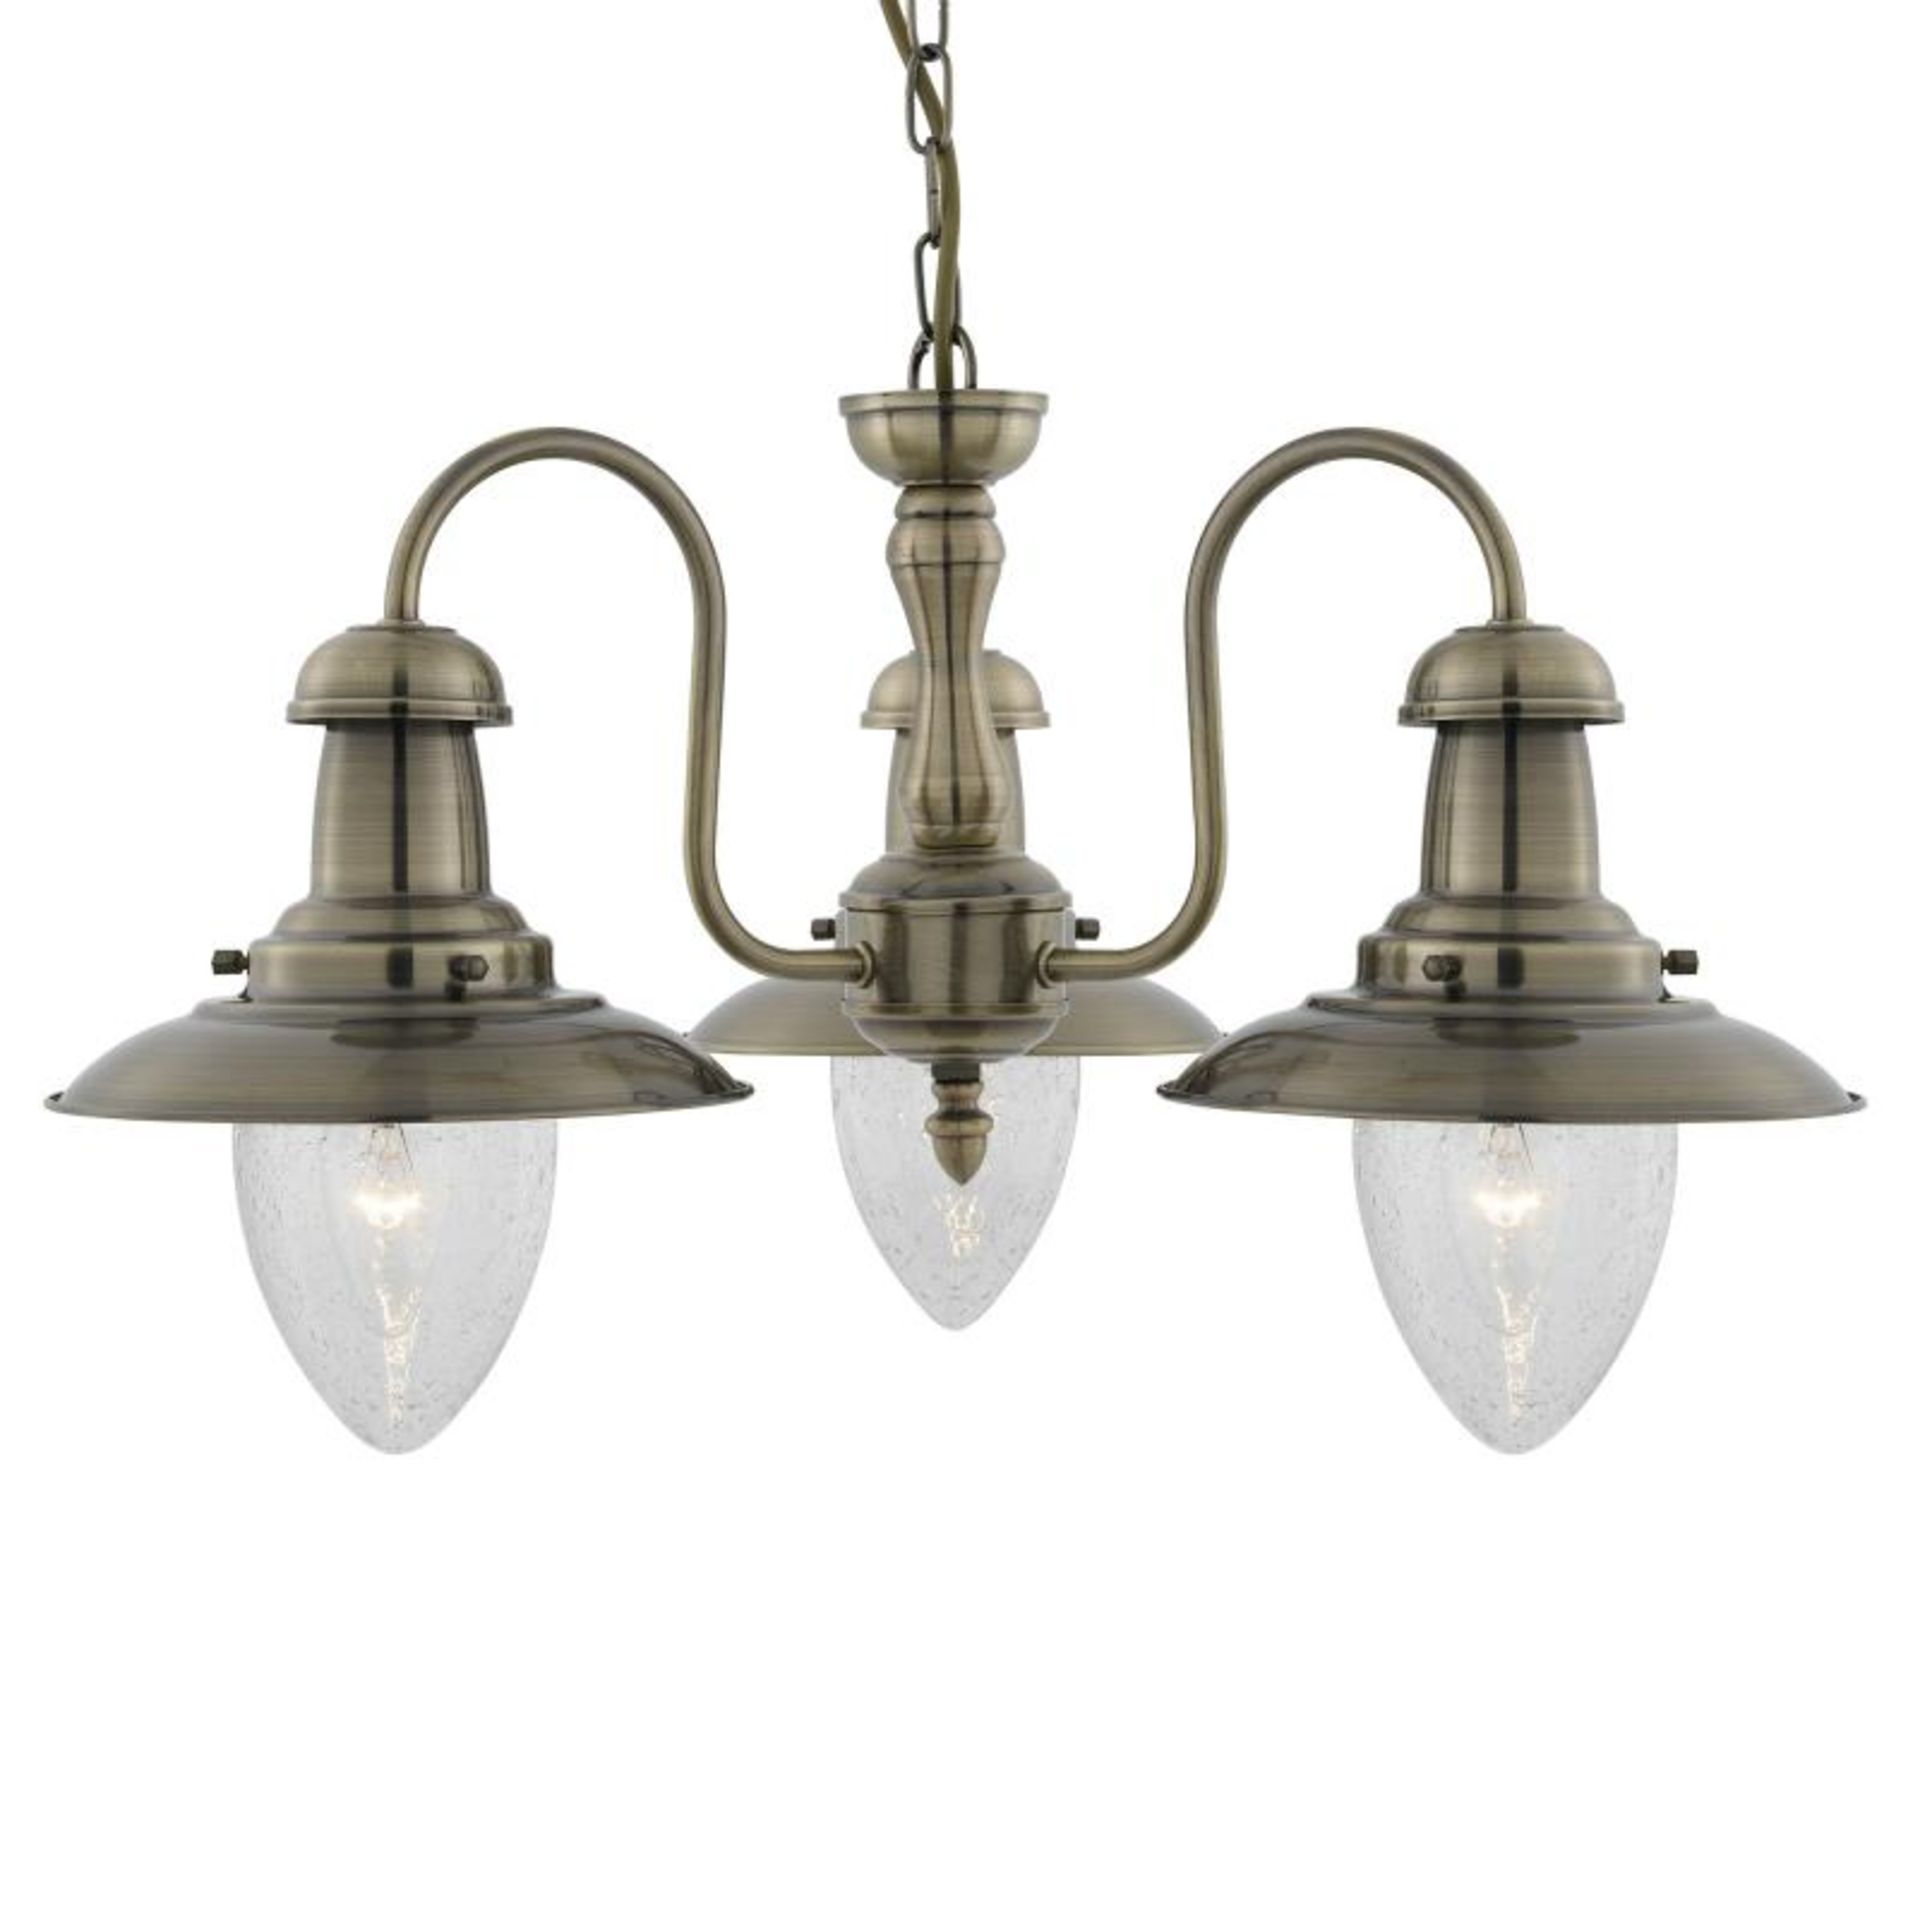 2 x Fisherman Antique Brass 3 Light Fittings With Oval Seeded Glass Shades - New Boxed Stock - CL323 - Image 2 of 2